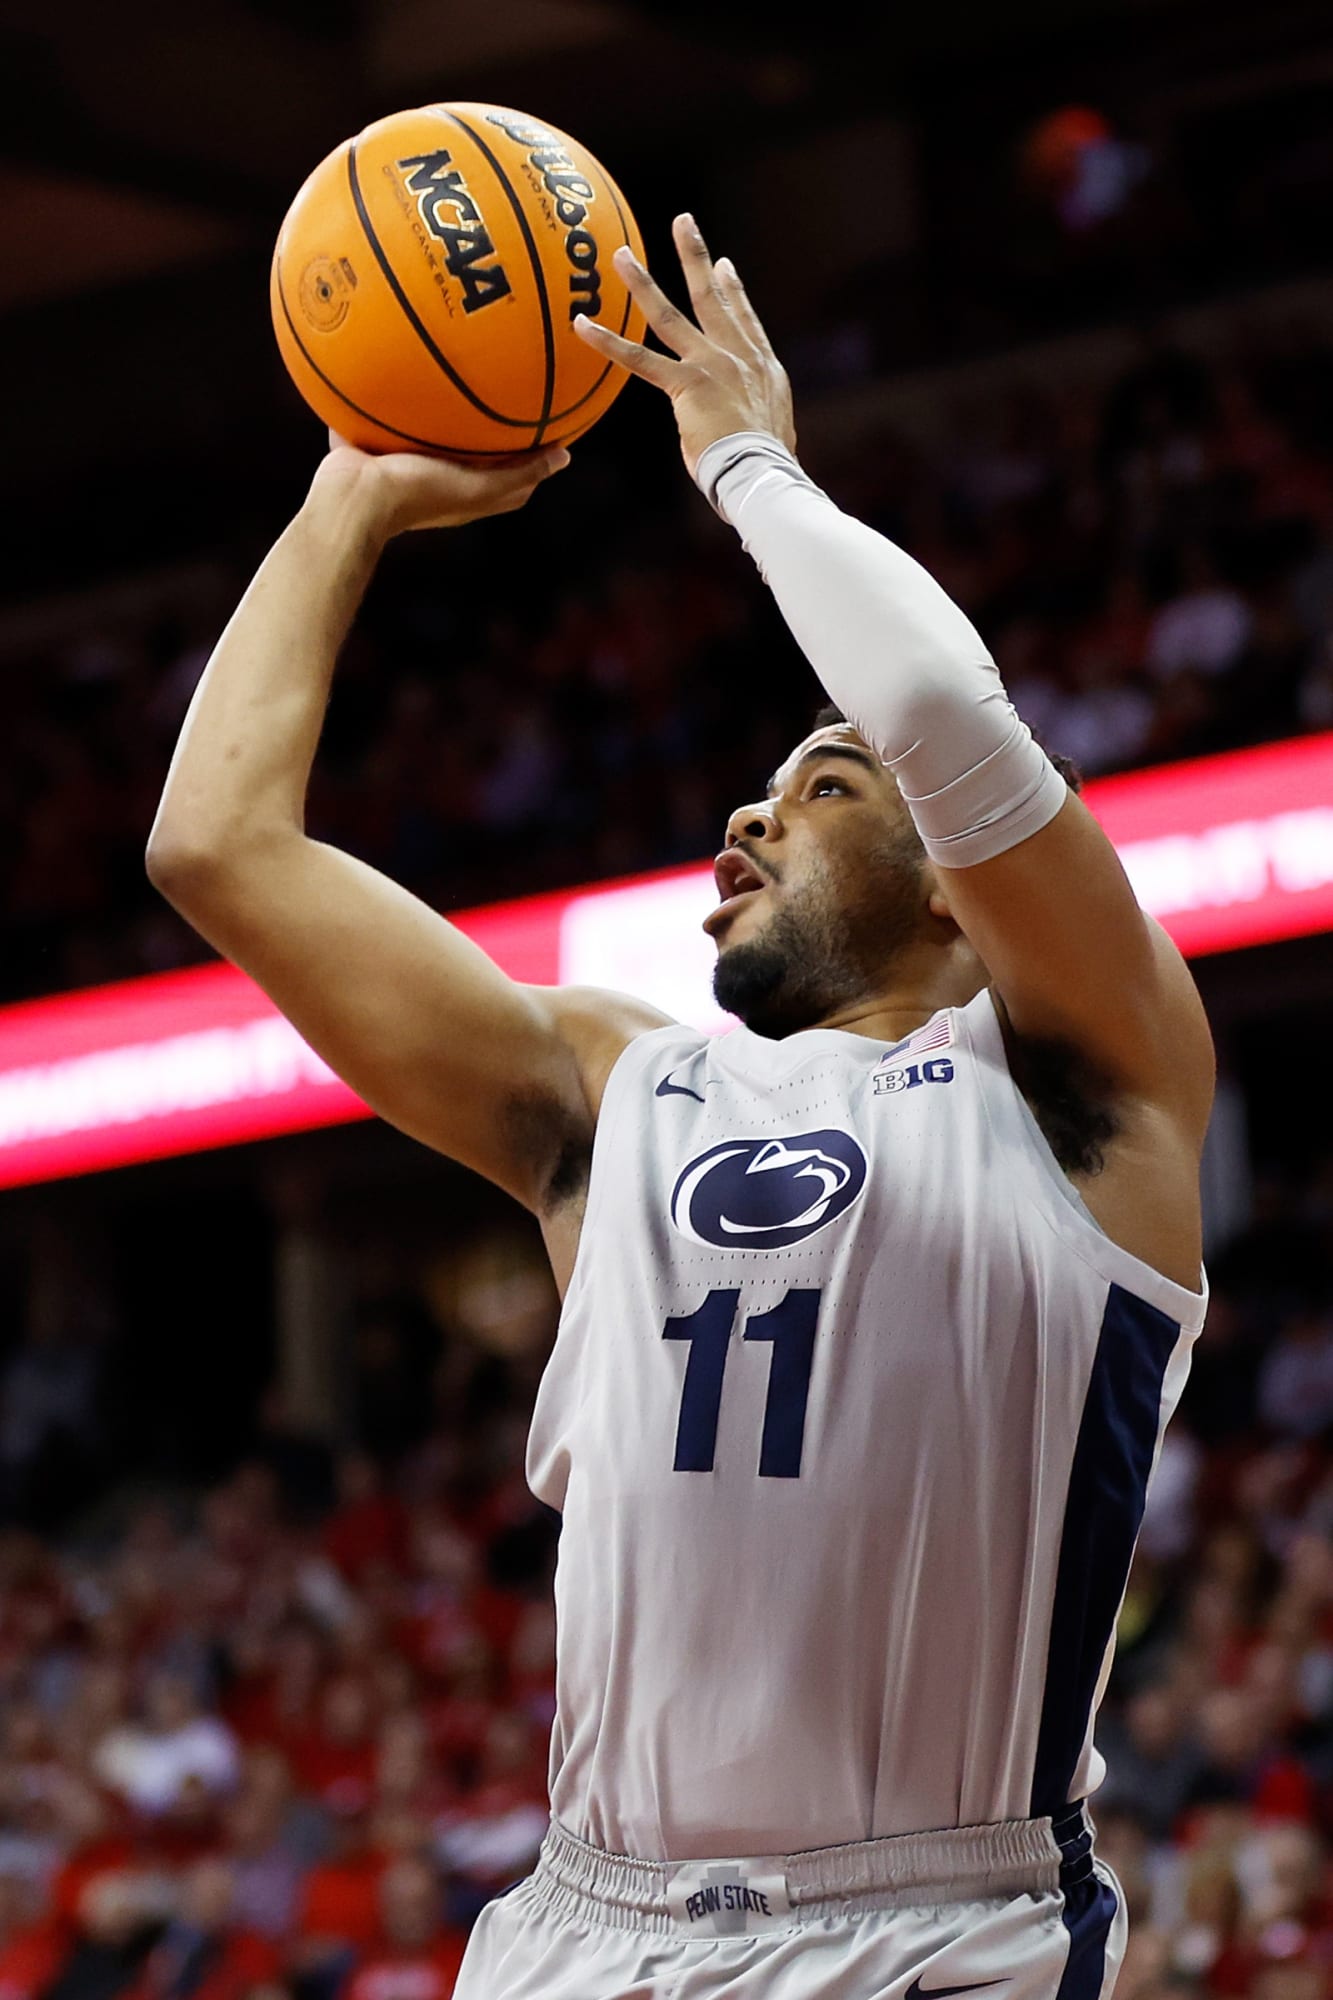 Penn State Basketball goes ice cold from three, falling to Rutgers 65-45